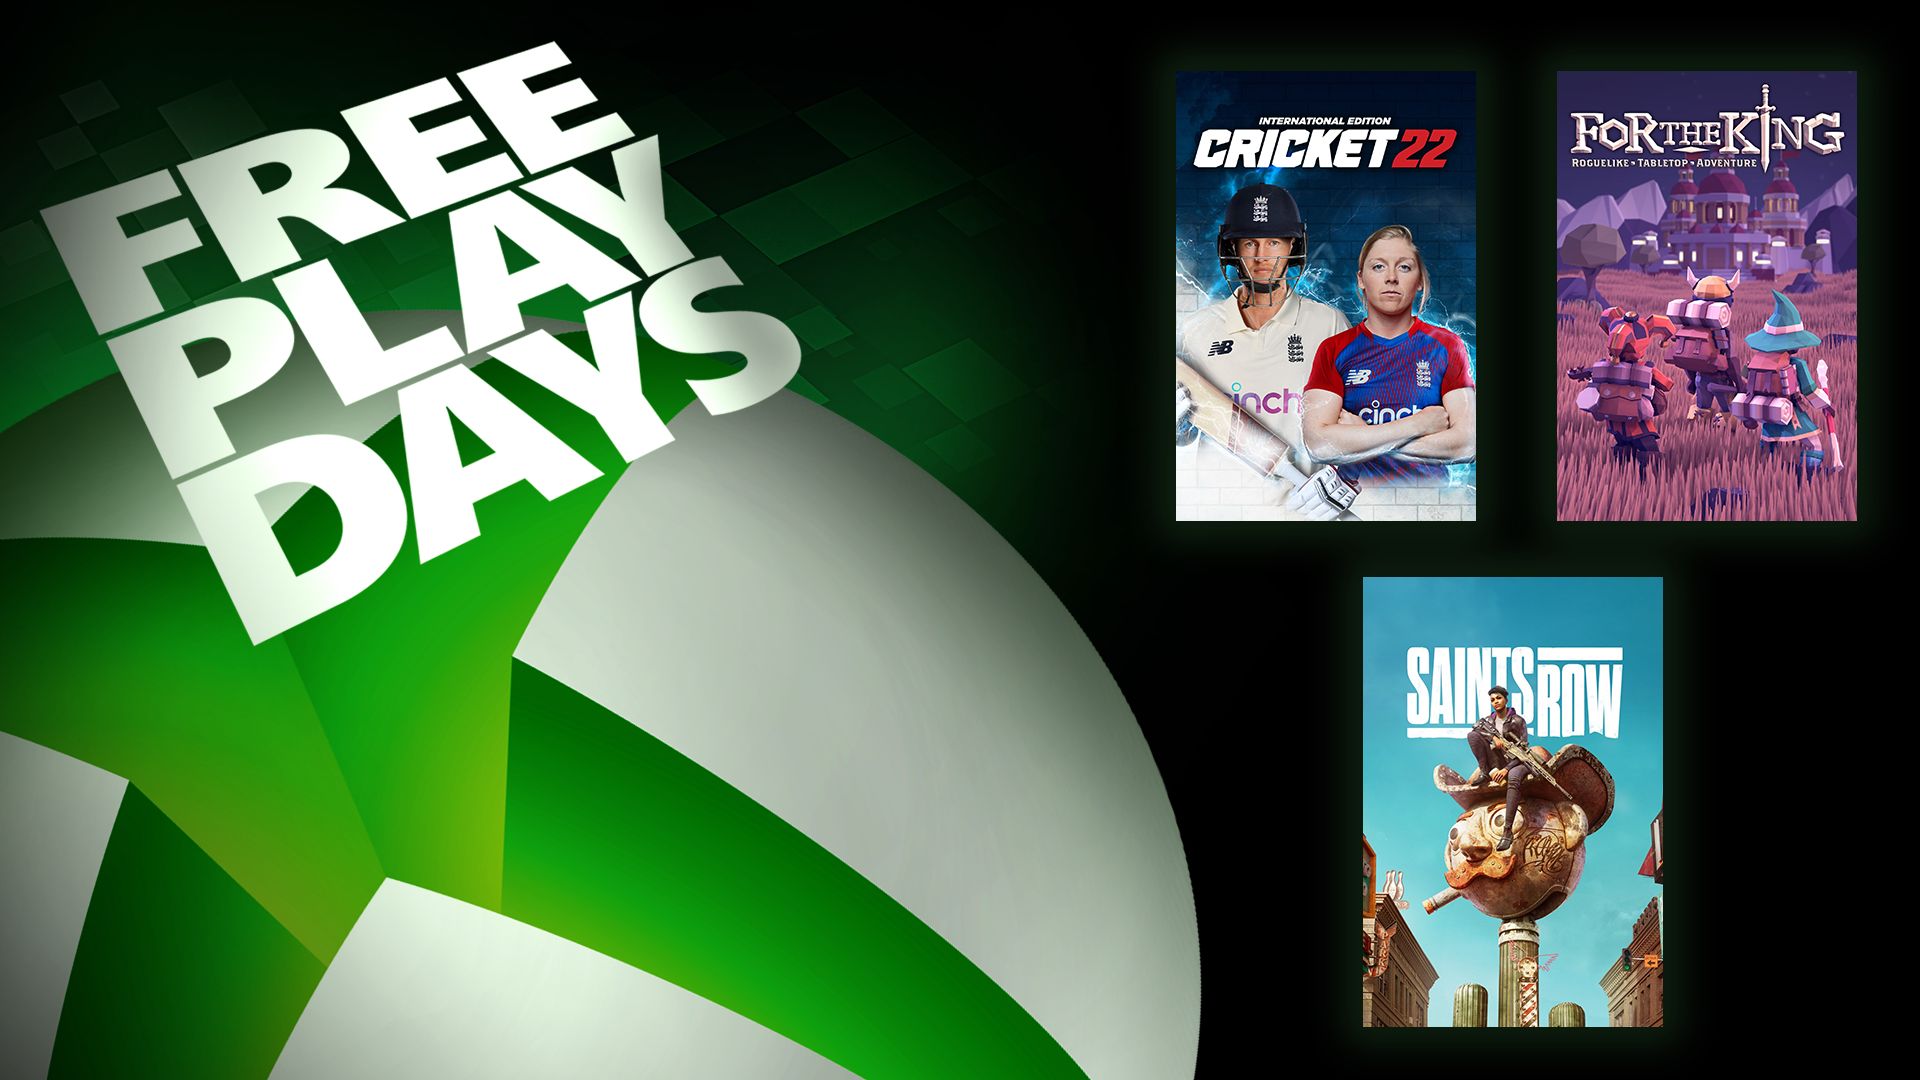 Free Play Days – Cricket 22, For the King, and Saints Row